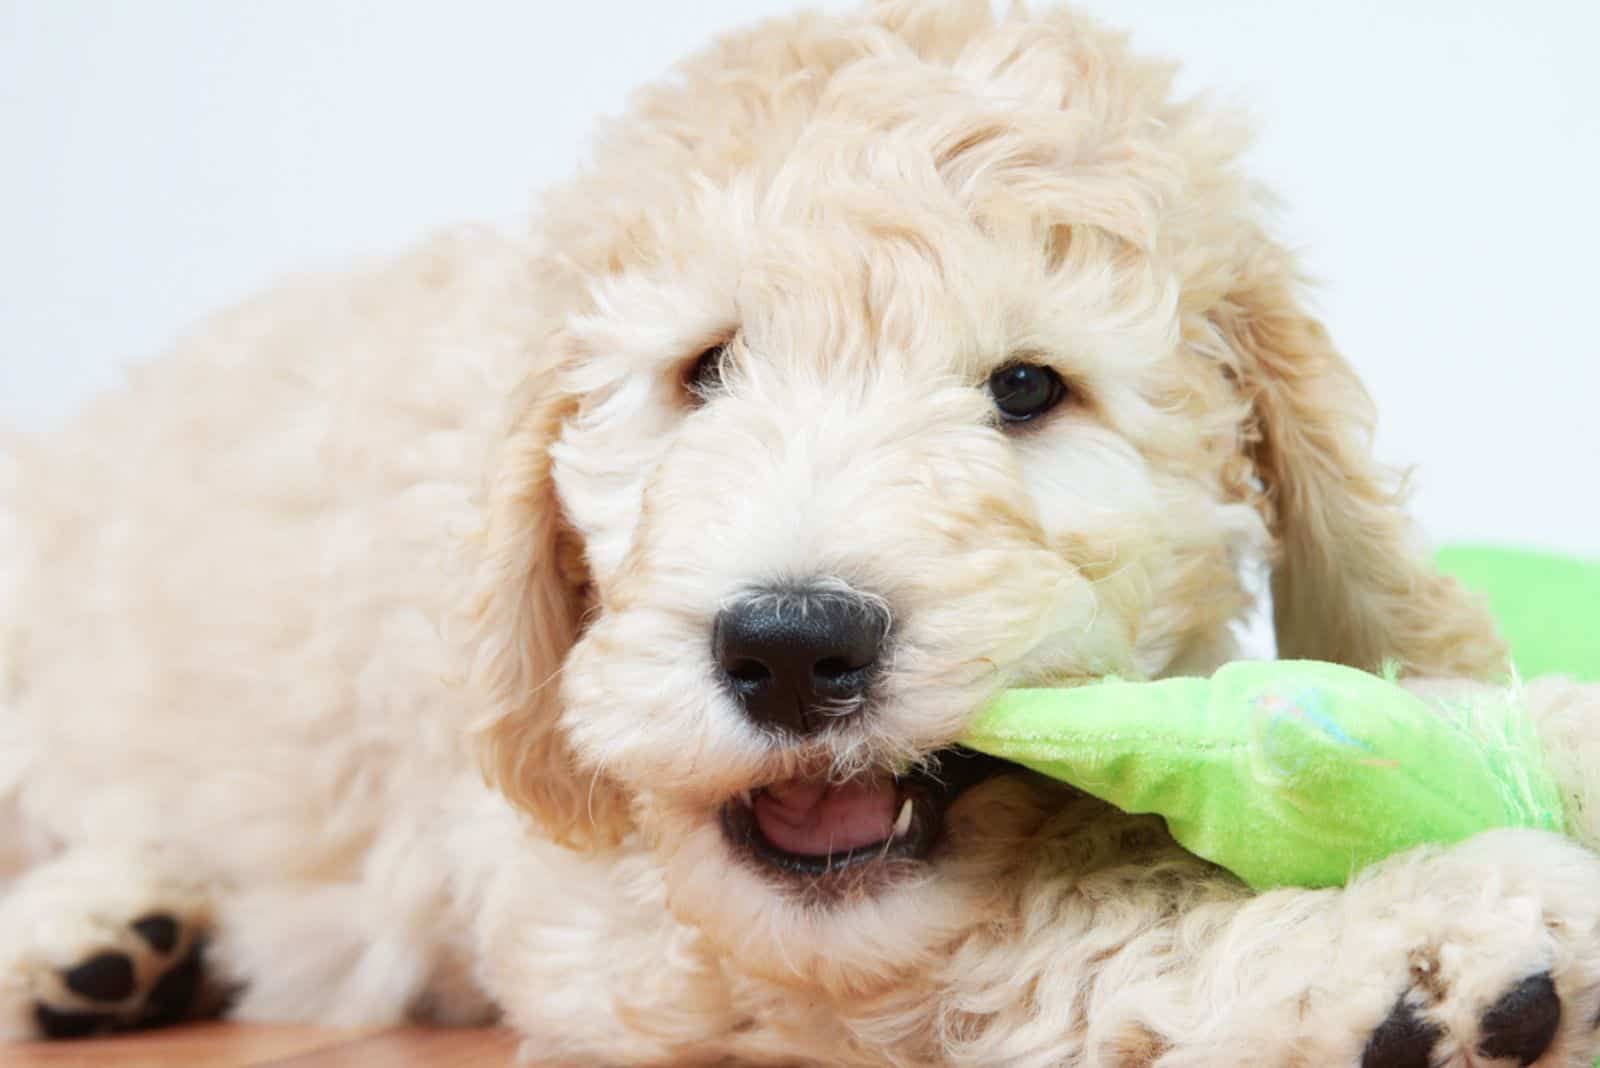 Cute puppy dog chewing a toy